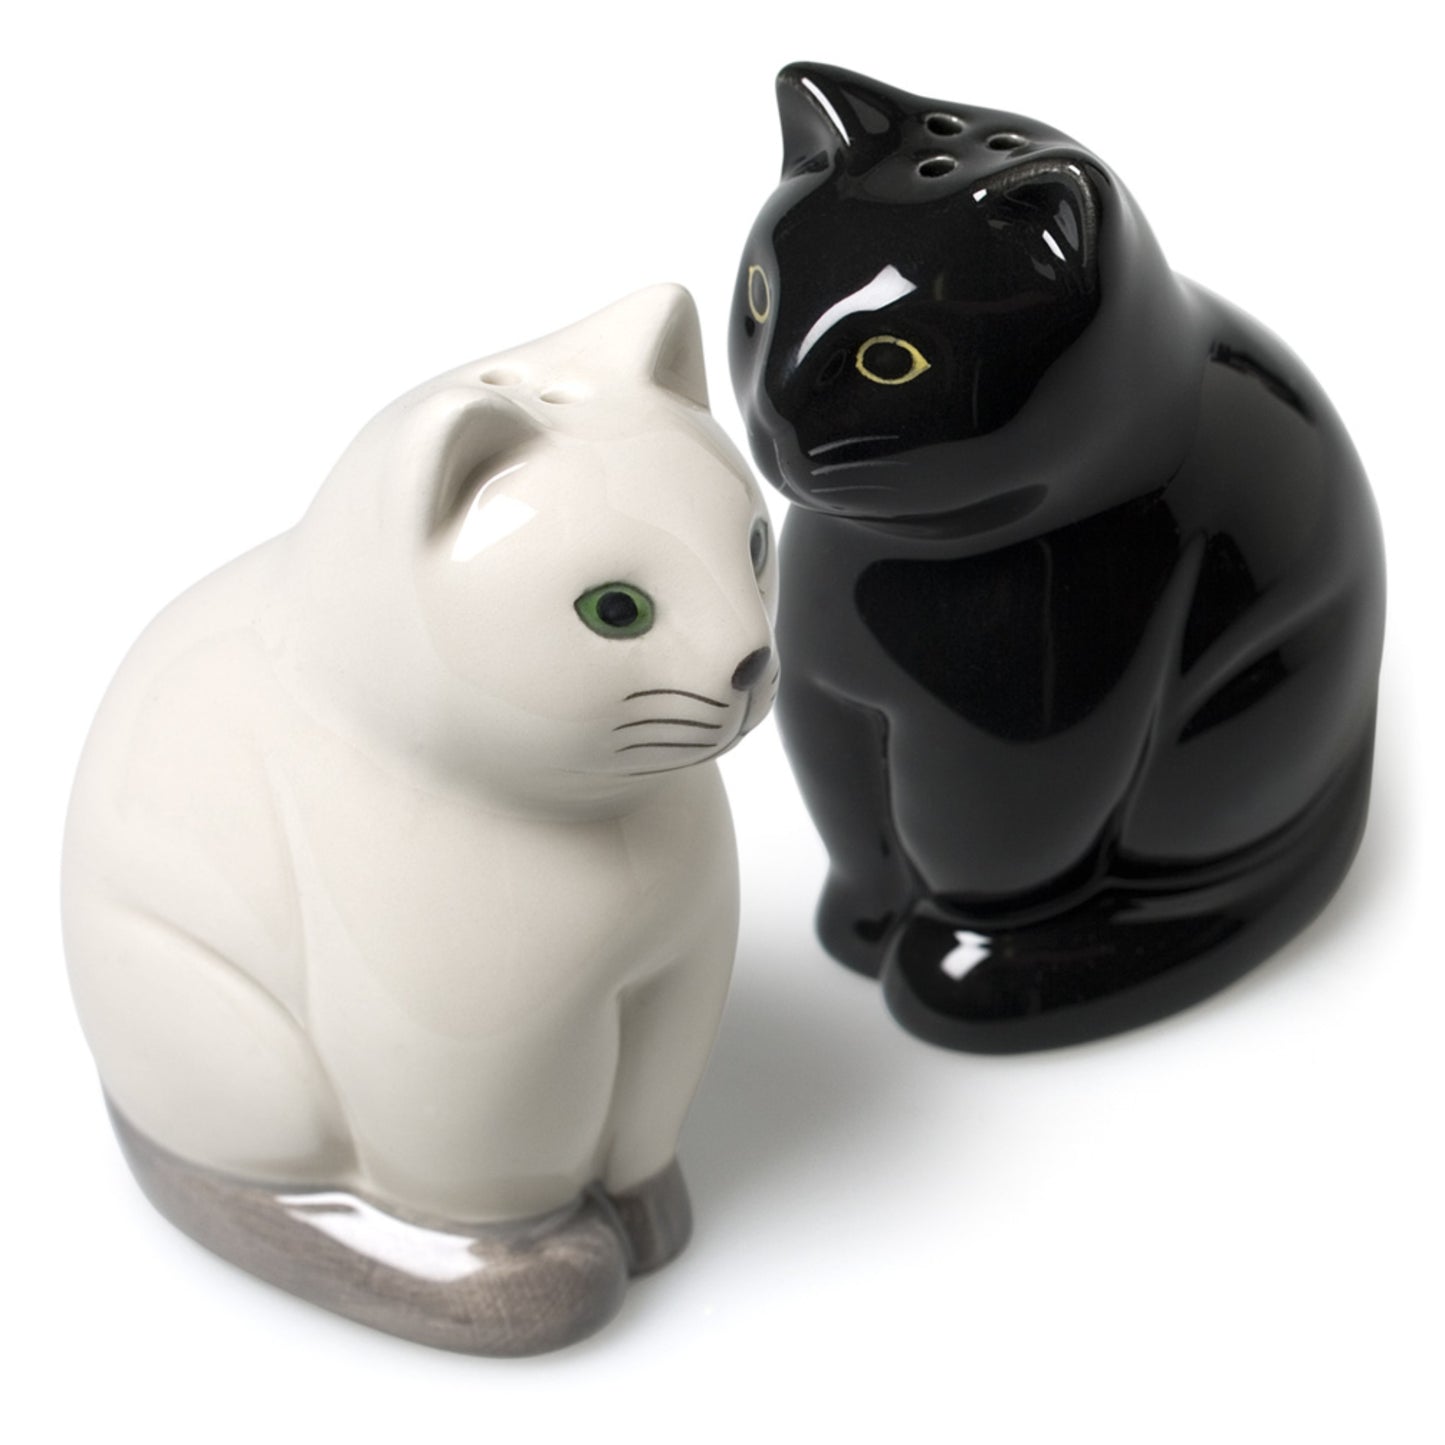 Salt & Pepper Shakers "Sitting Cats" - Tiny Tiger Gift Shop